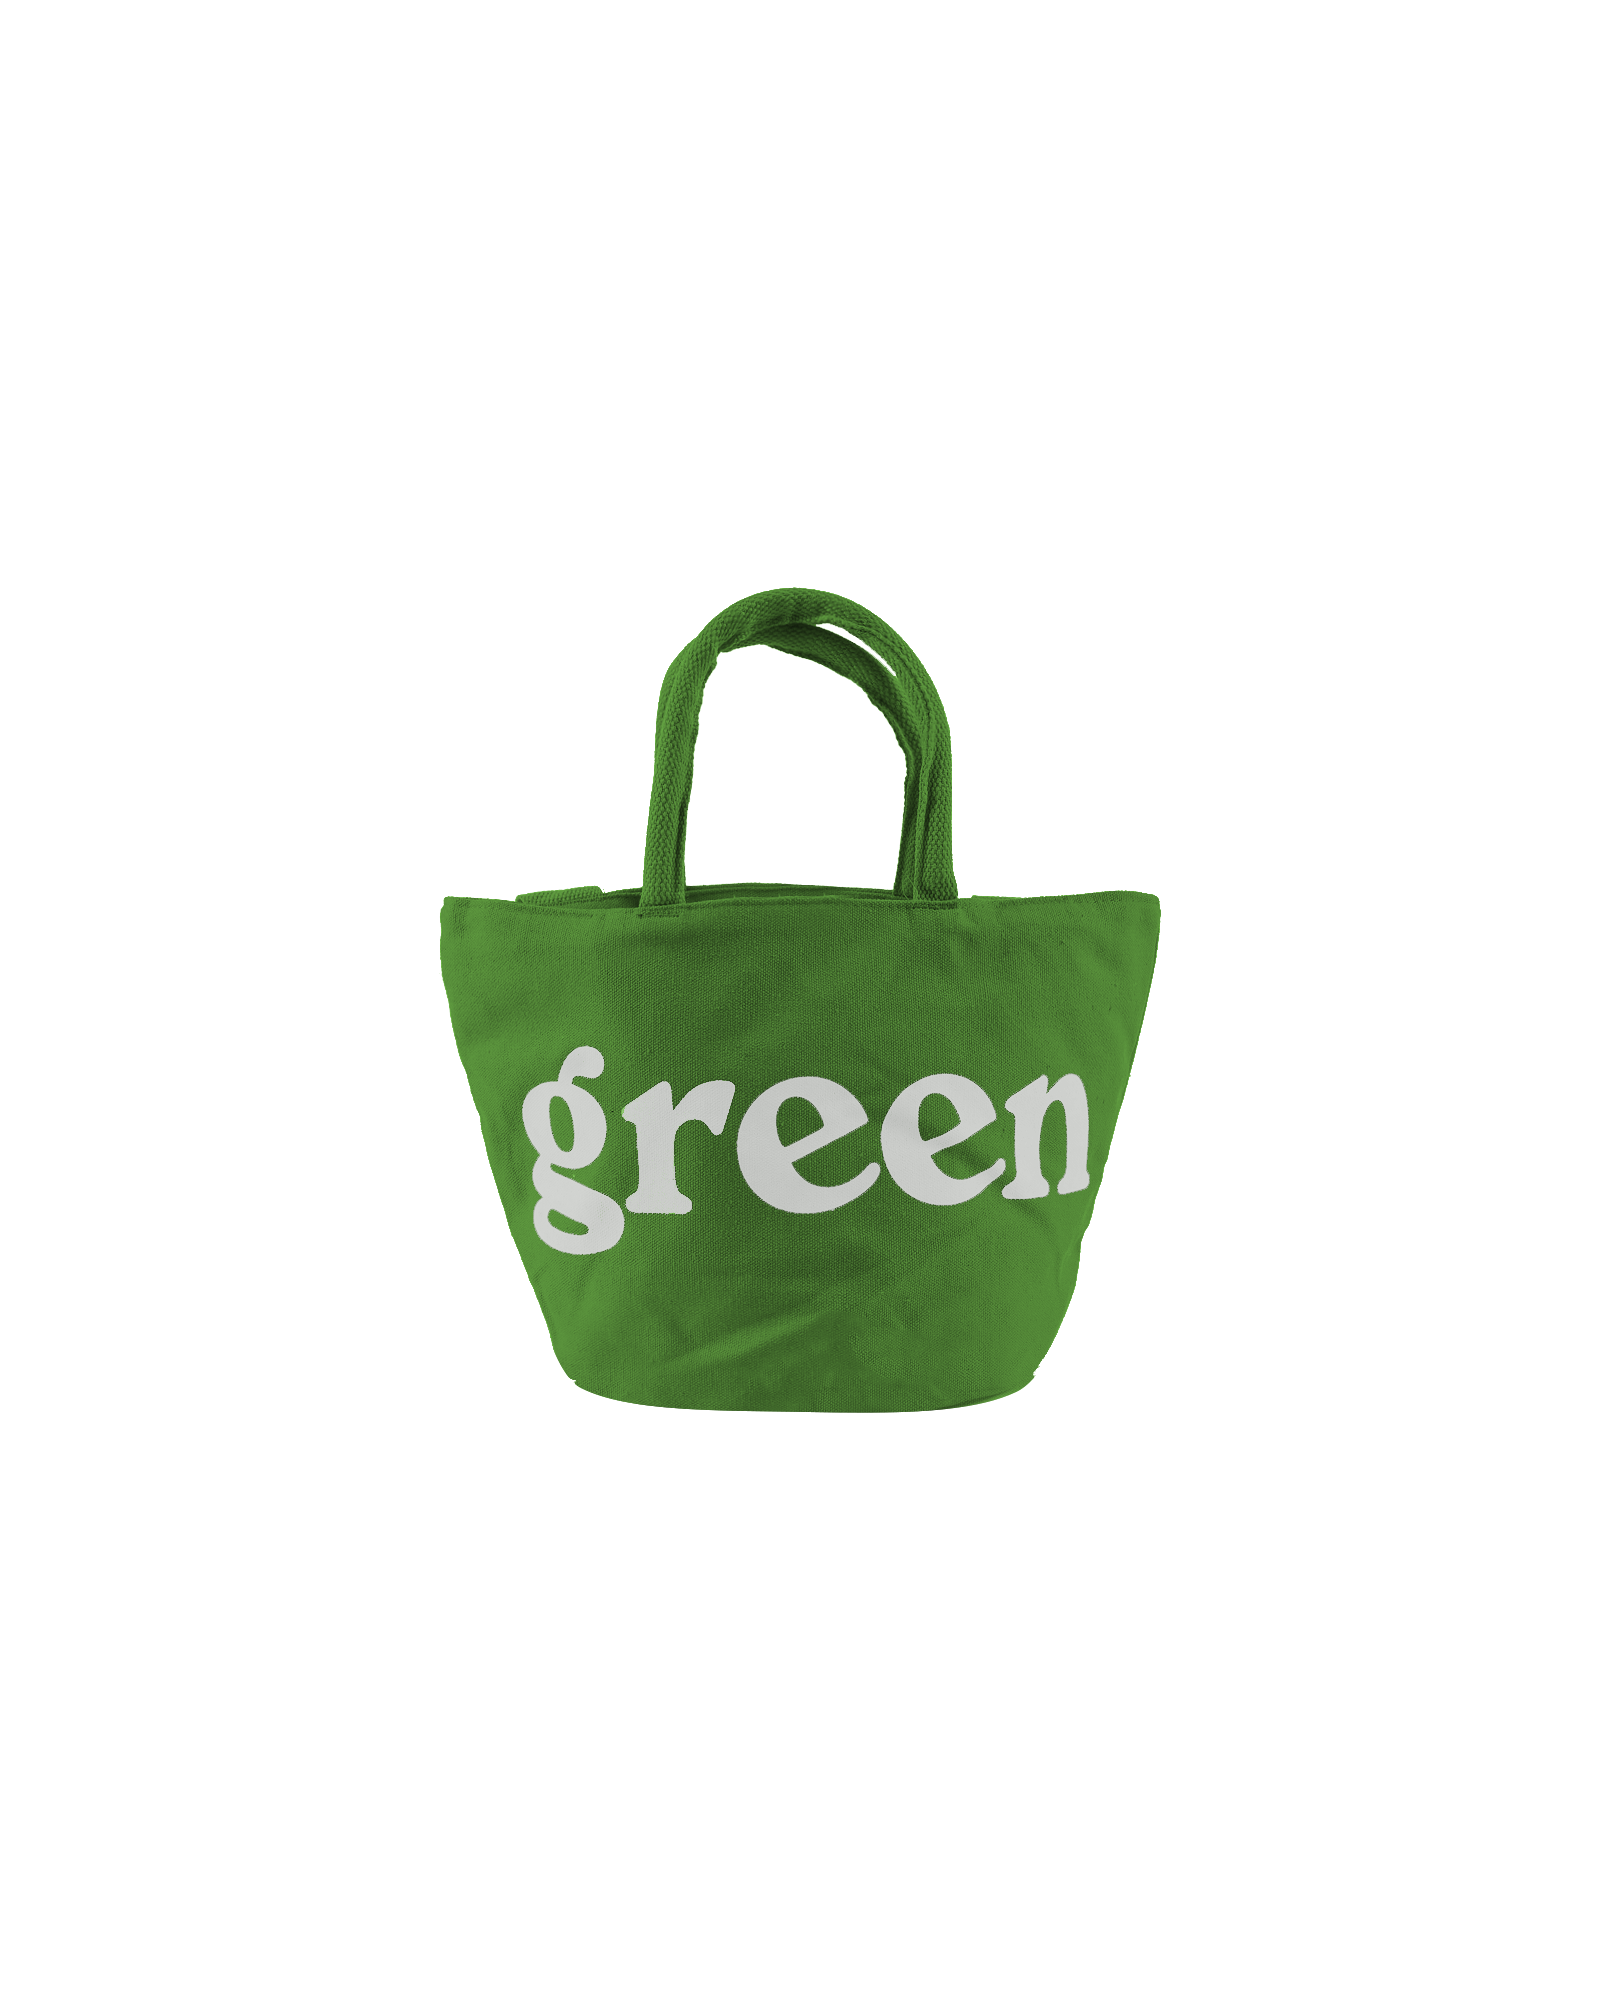 Mister Green - Accessory - Small Grow Bag/Tote - V2 - Green